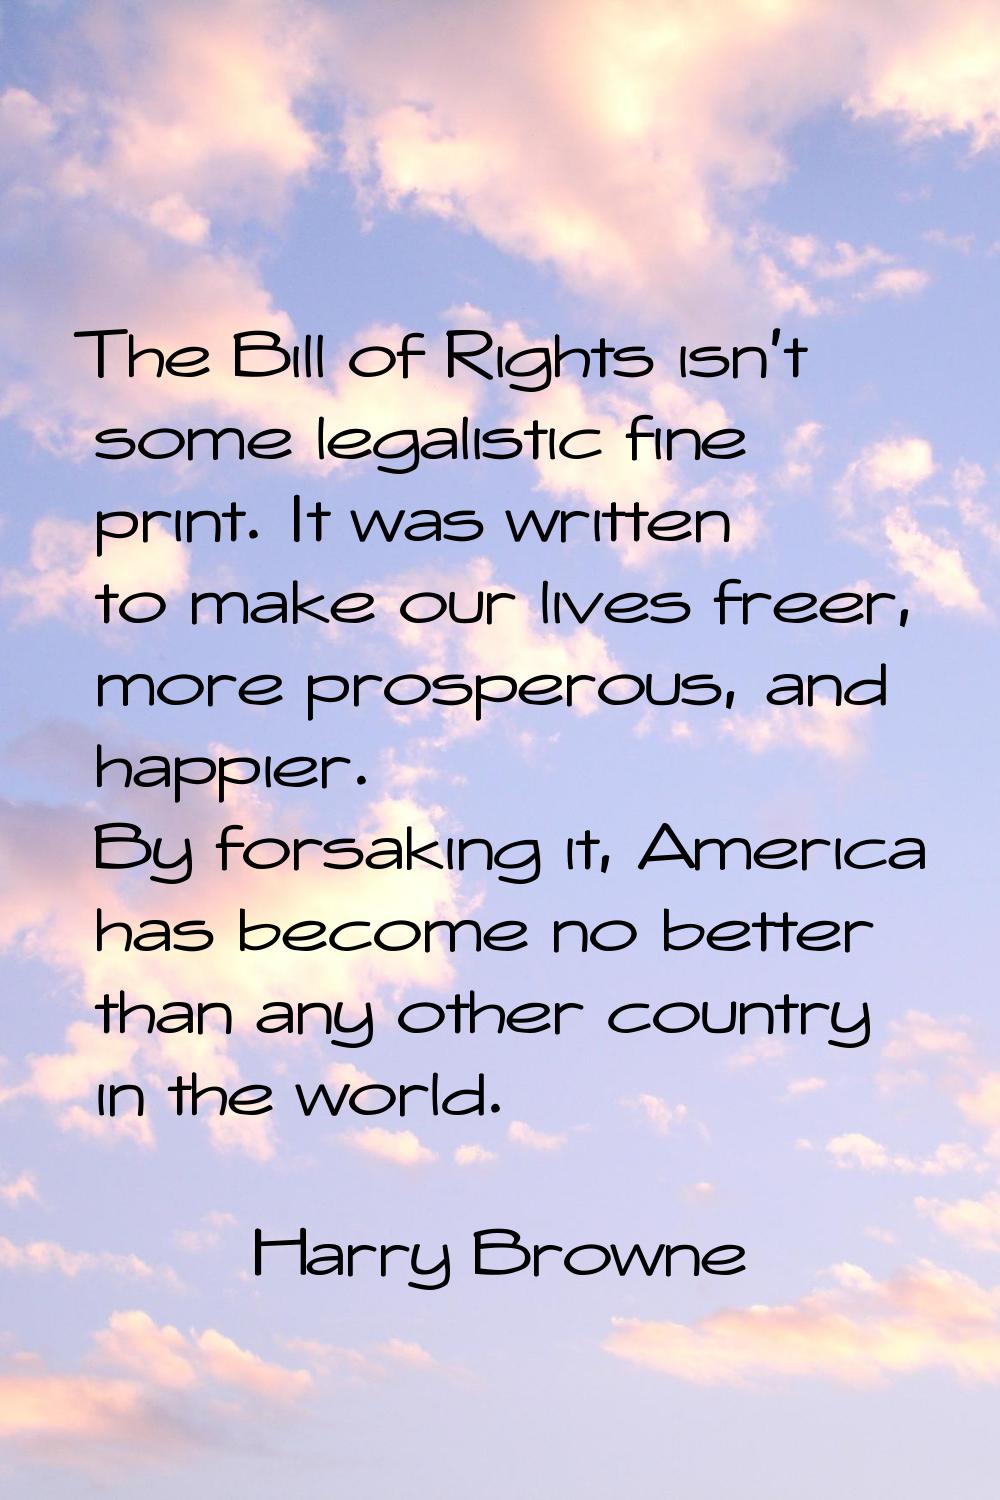 The Bill of Rights isn't some legalistic fine print. It was written to make our lives freer, more p